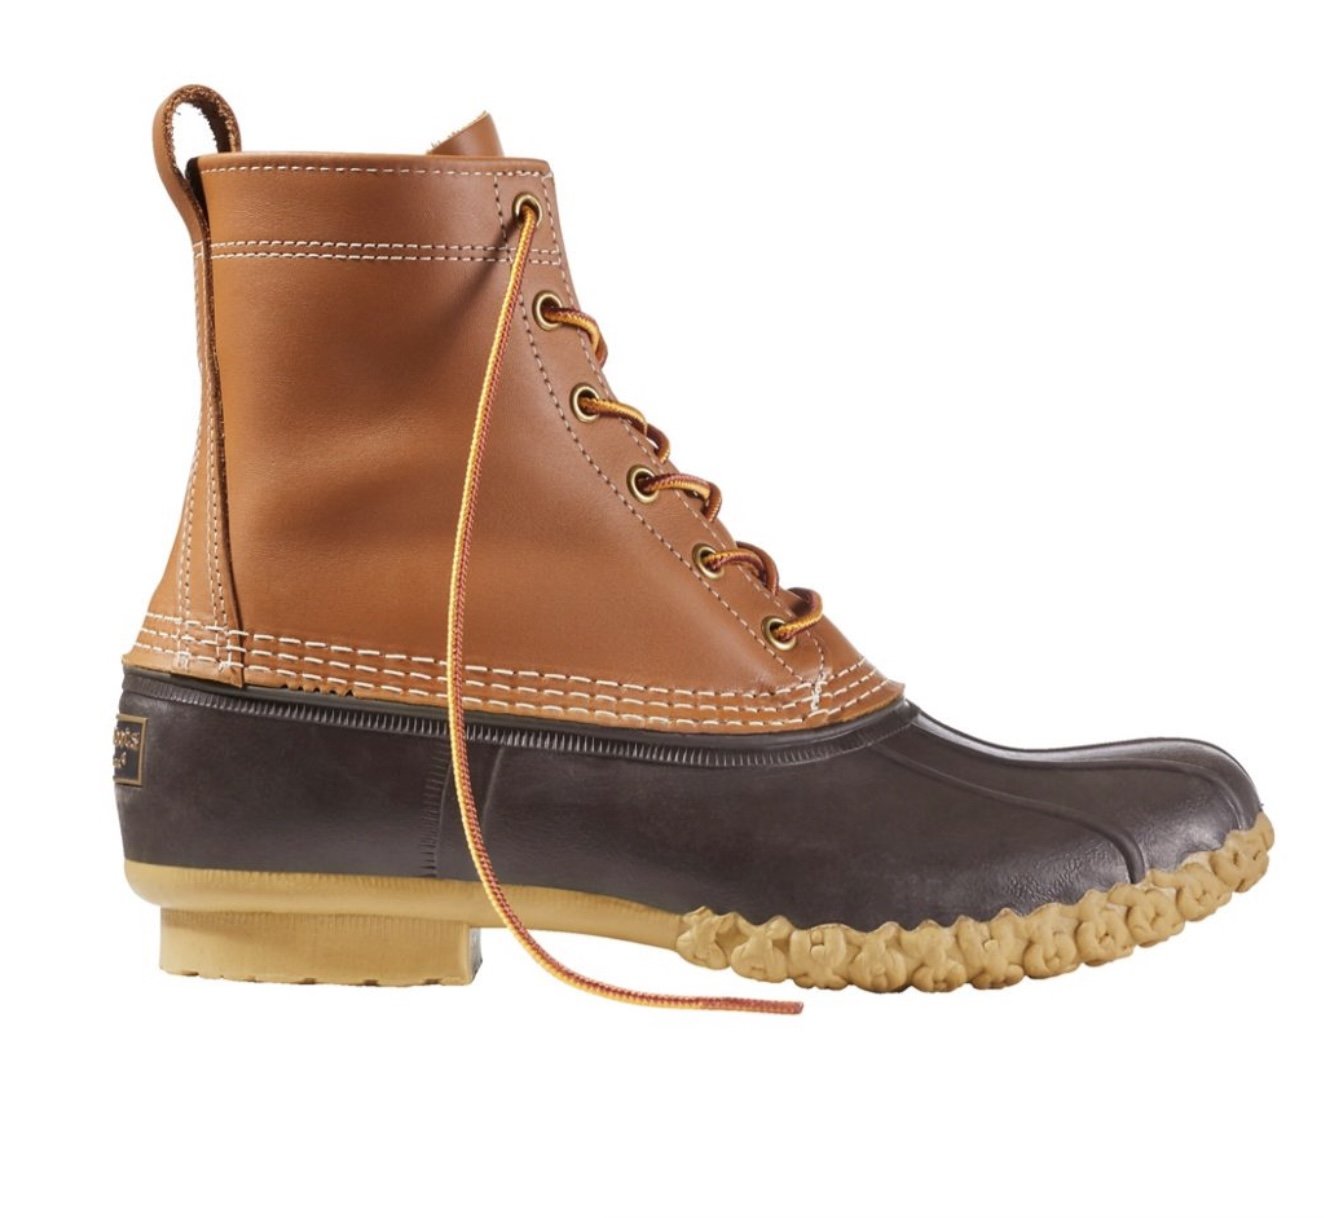 11 Best Men's Winter Boots To Buy In Australia In 2022  Checkout – Best  Deals, Expert Product Reviews & Buying Guides